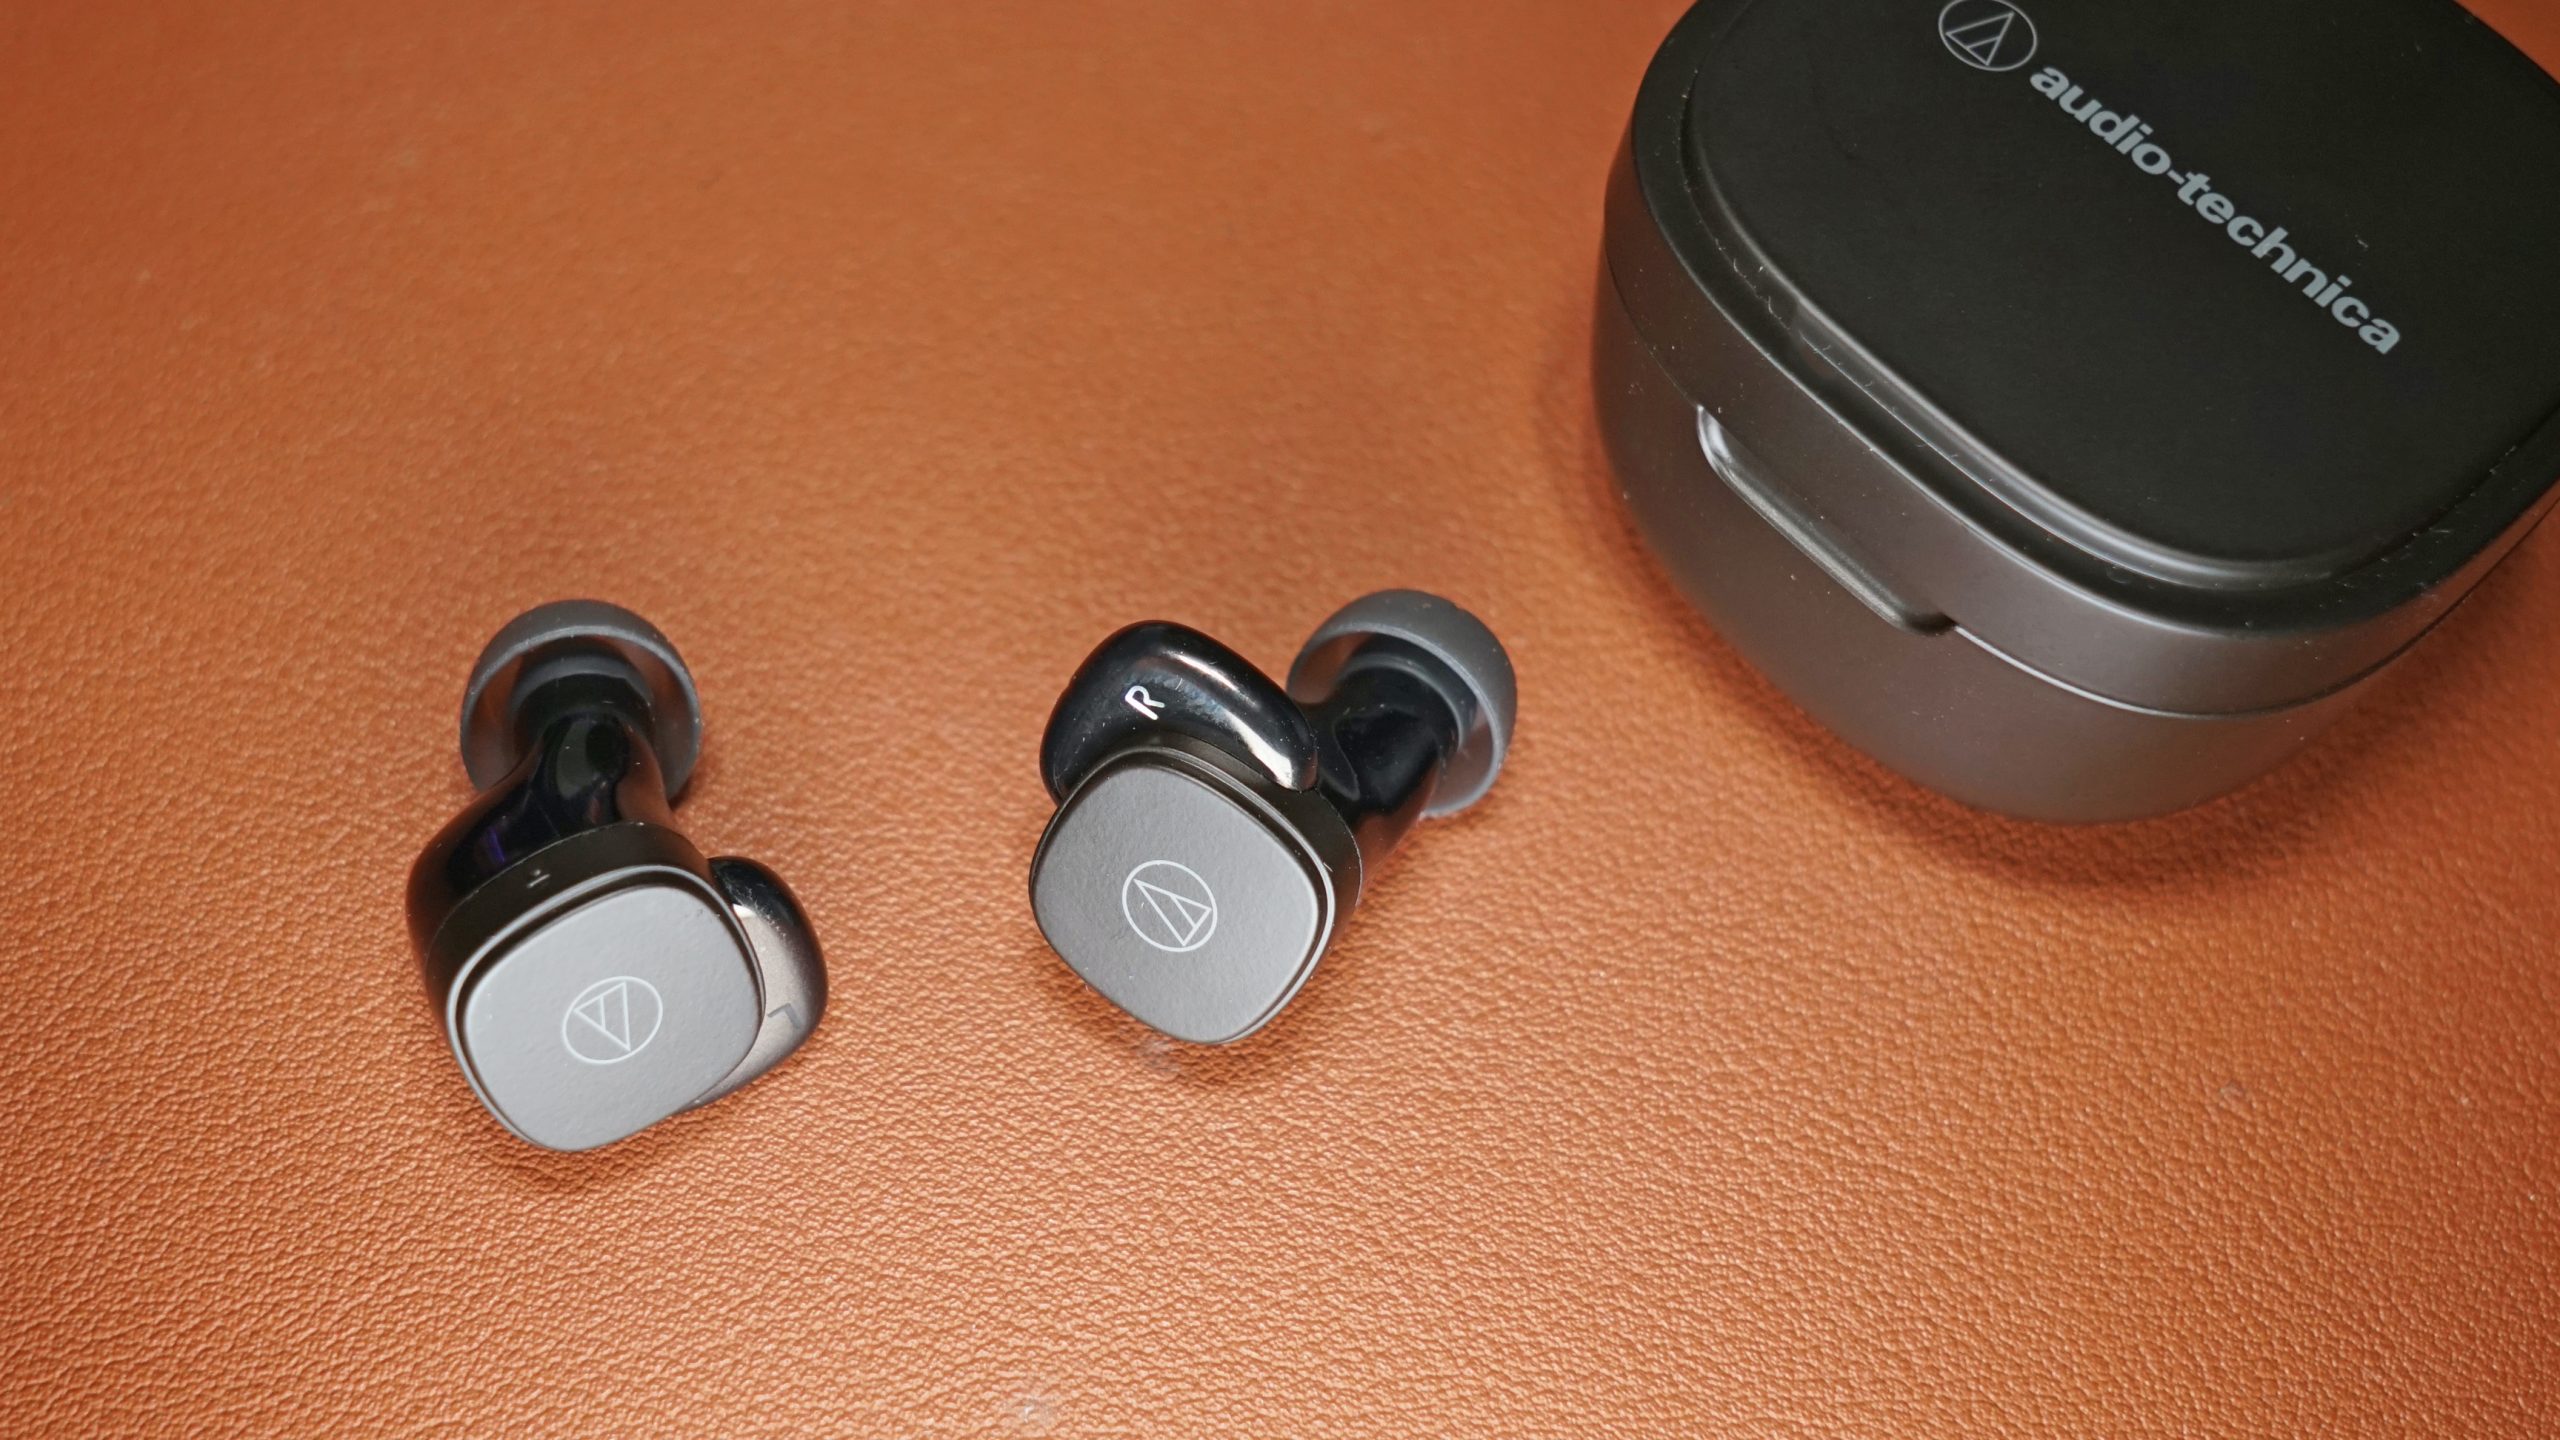 Audio-Technica ATH-SQ1TW review: Plain and simple - SoundGuys